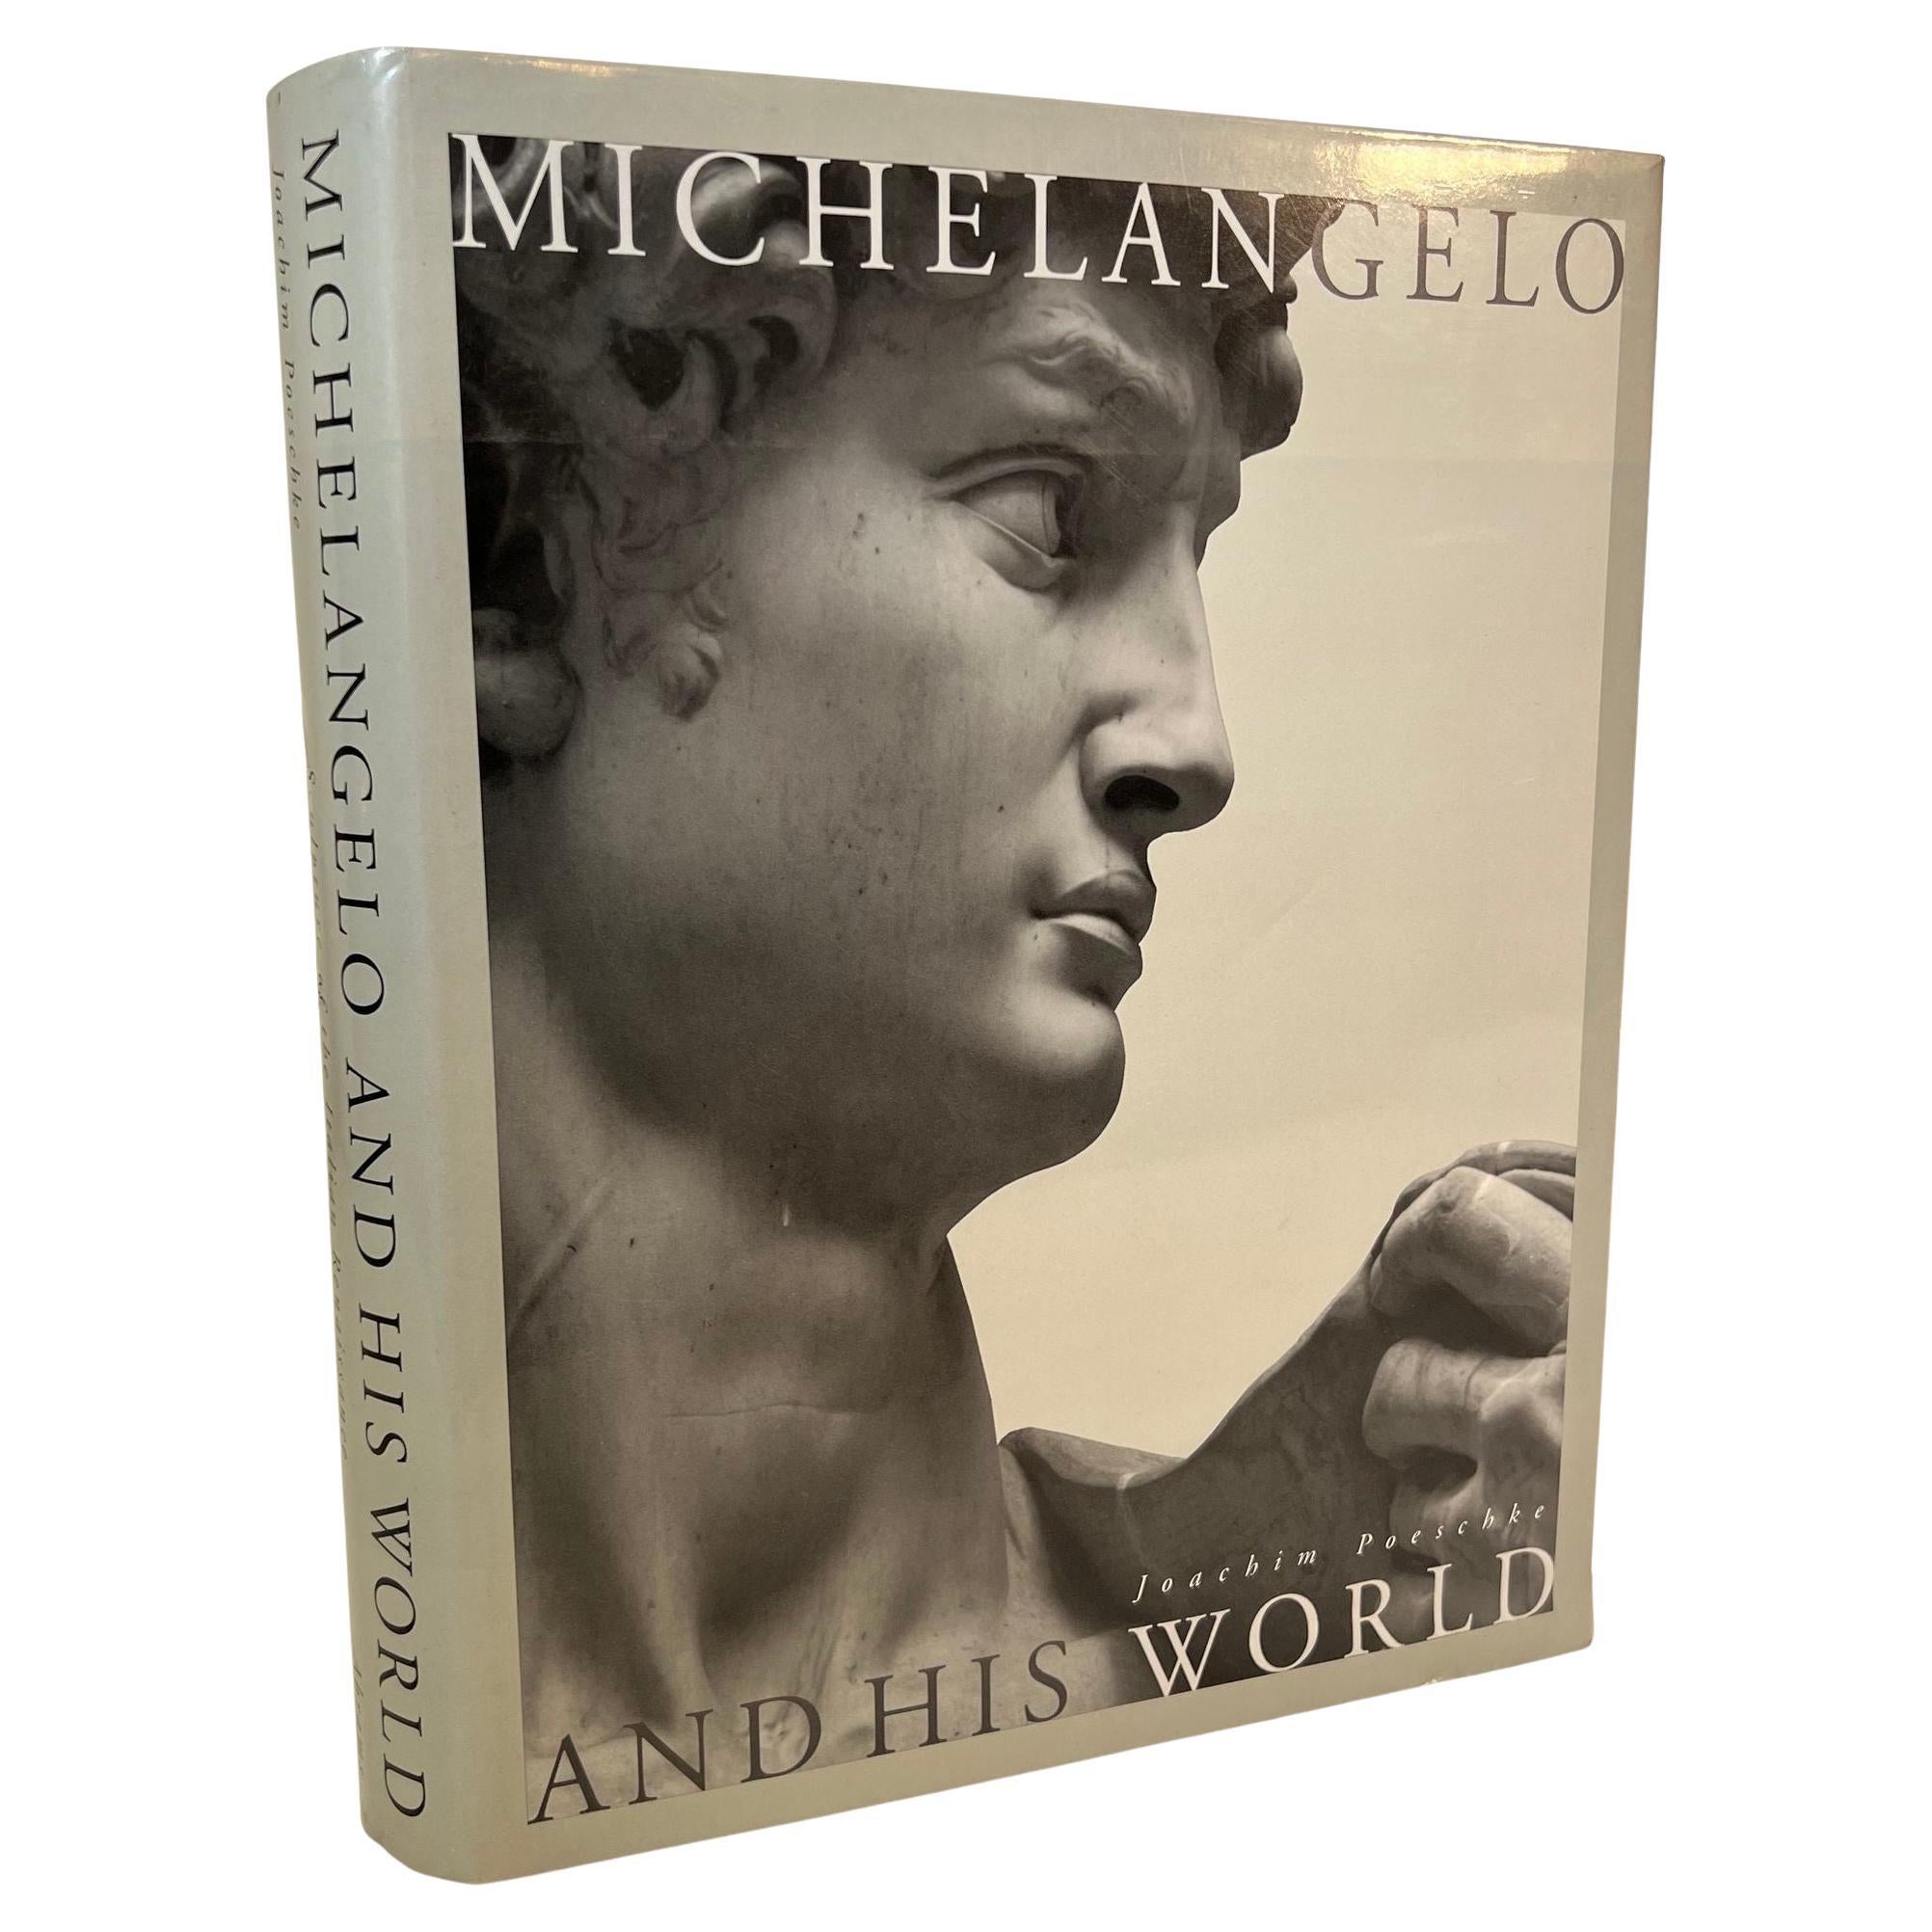 1996 Michelangelo And His World Hardcover book by Joachim Poeschke